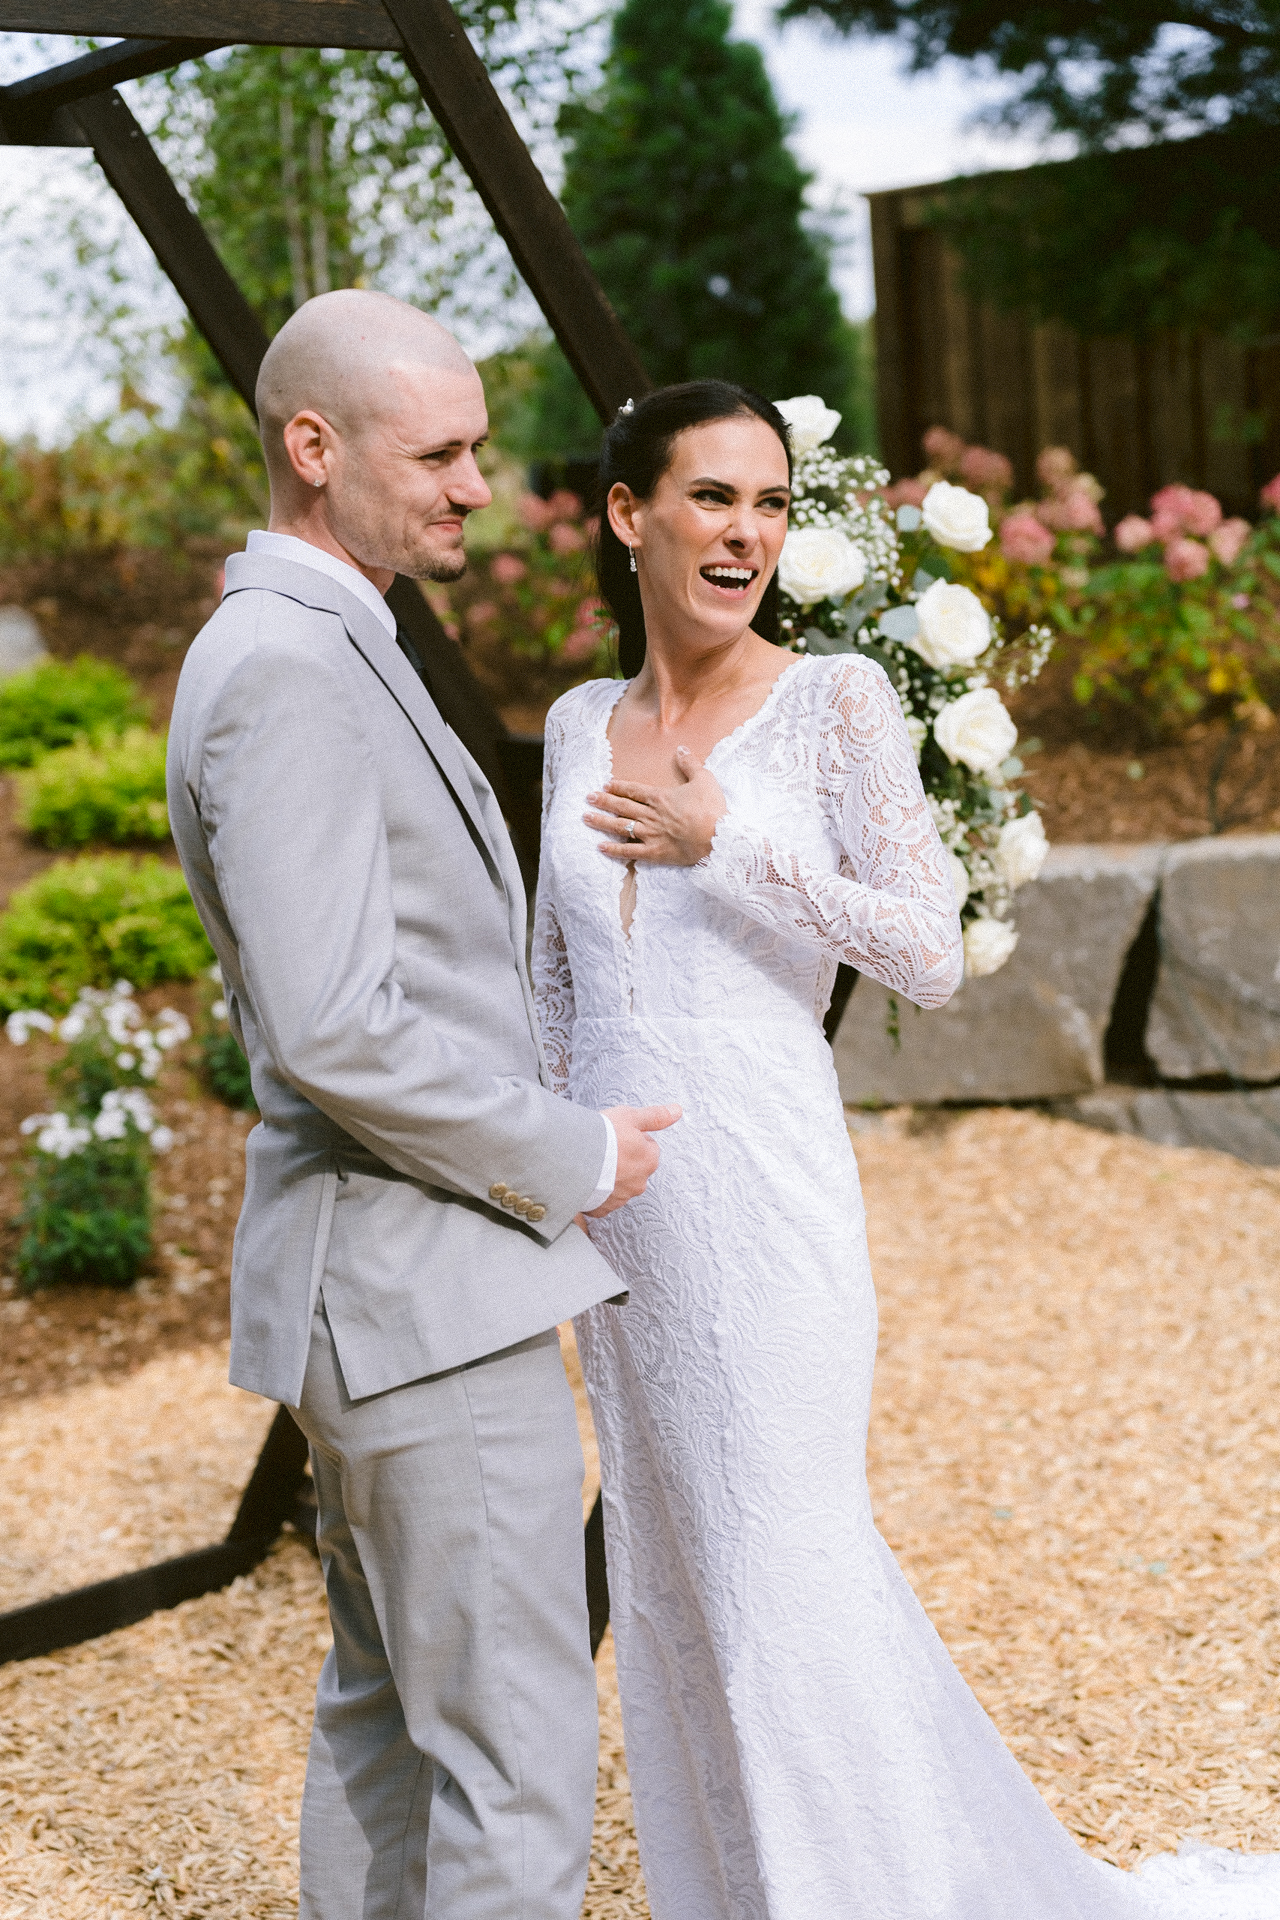 A smiling couple dressed in wedding attire, with the individual in a white dress and the other in a gray suit, stand together outdoors.